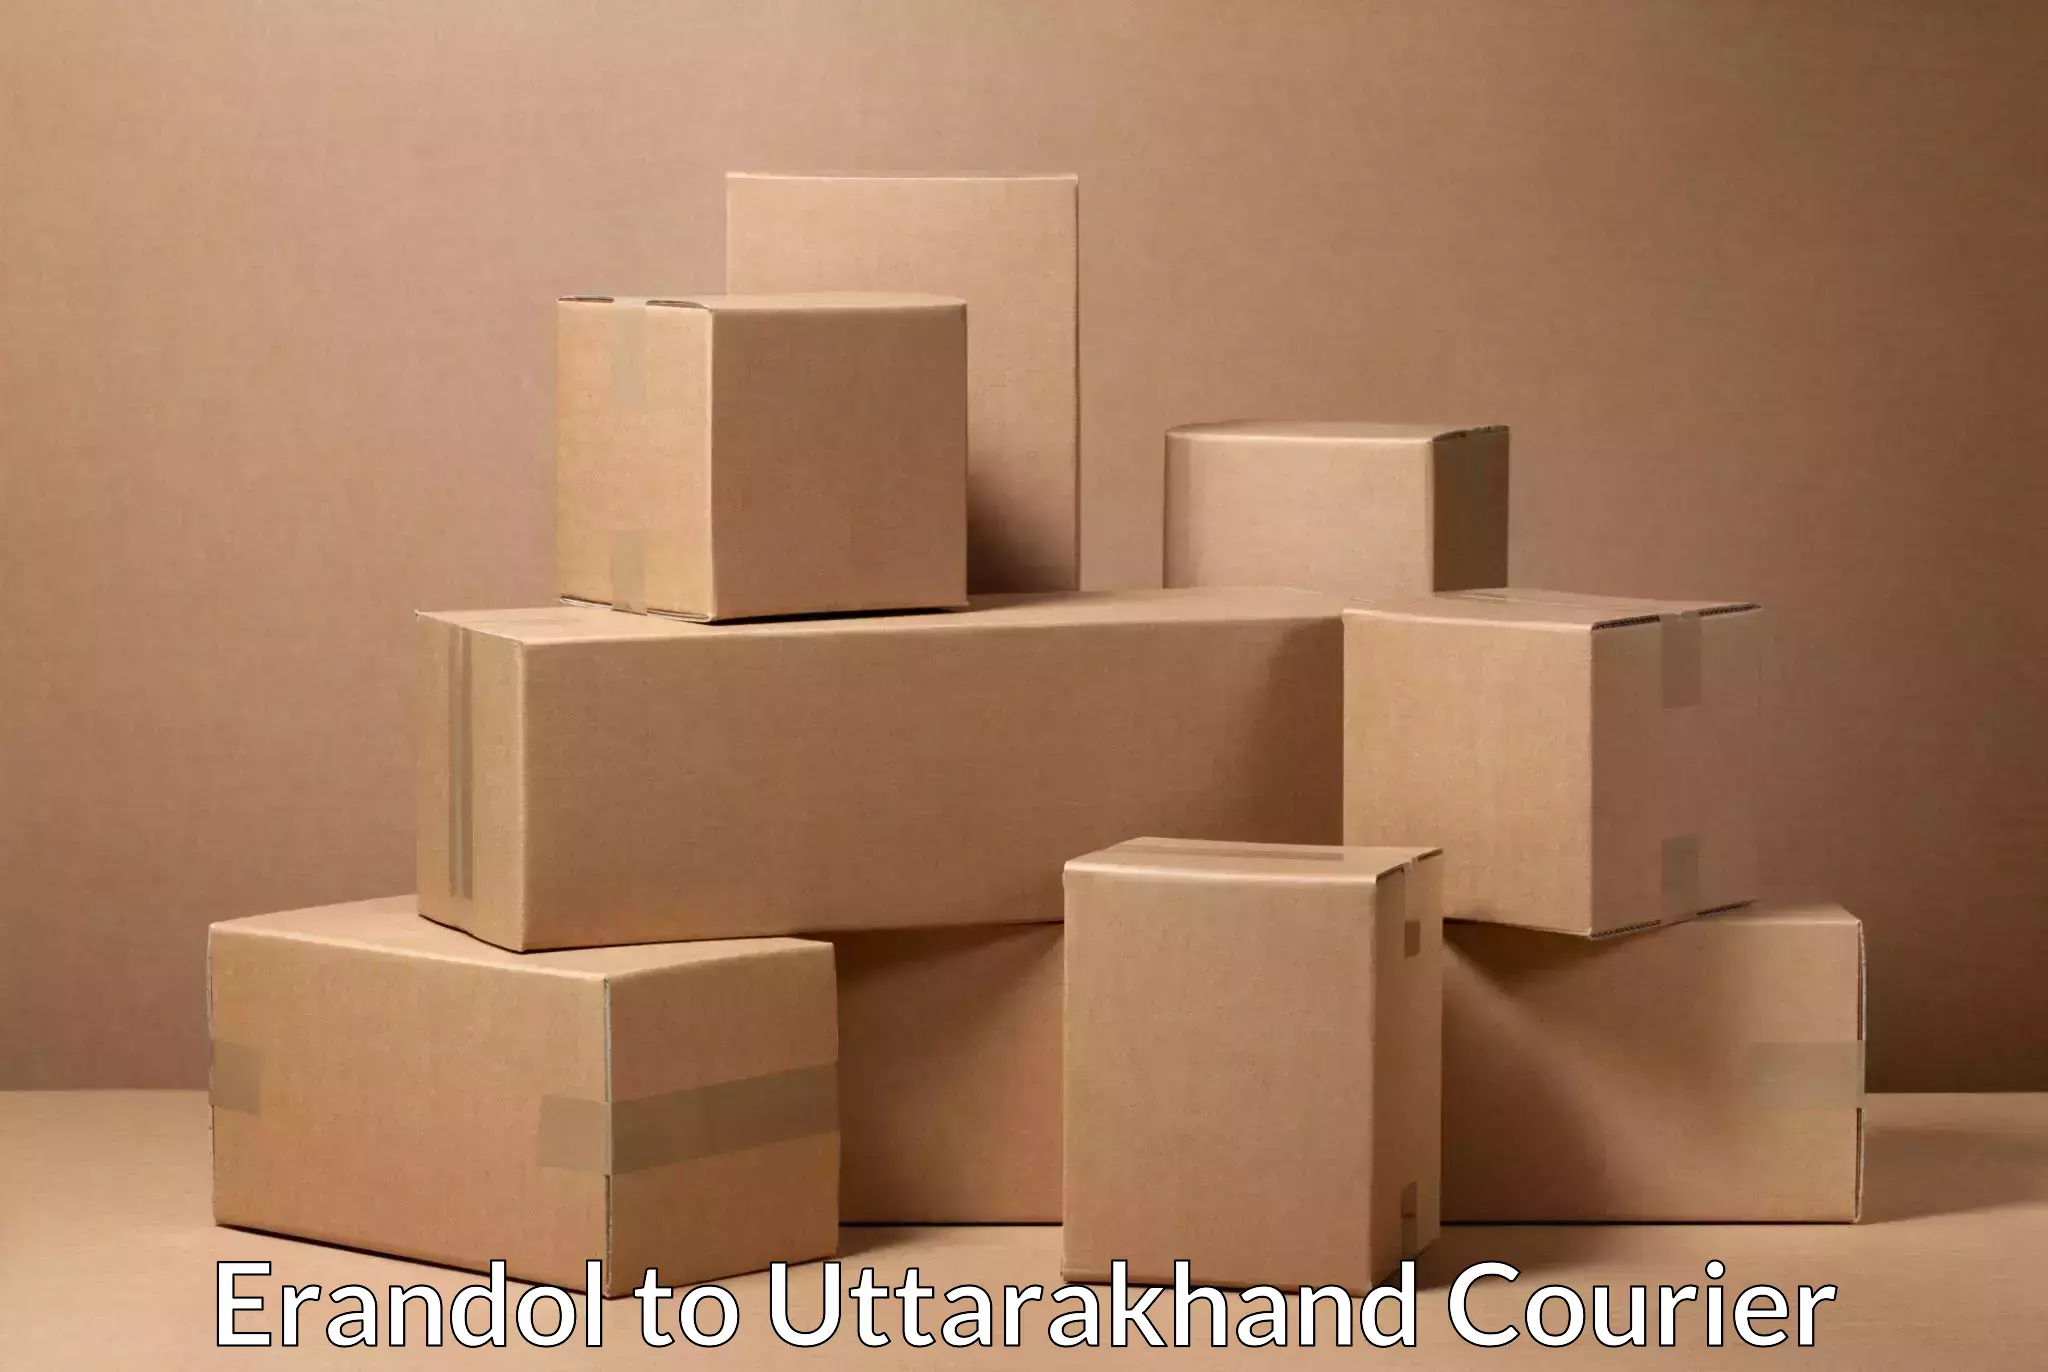 Full-service courier options Erandol to Roorkee